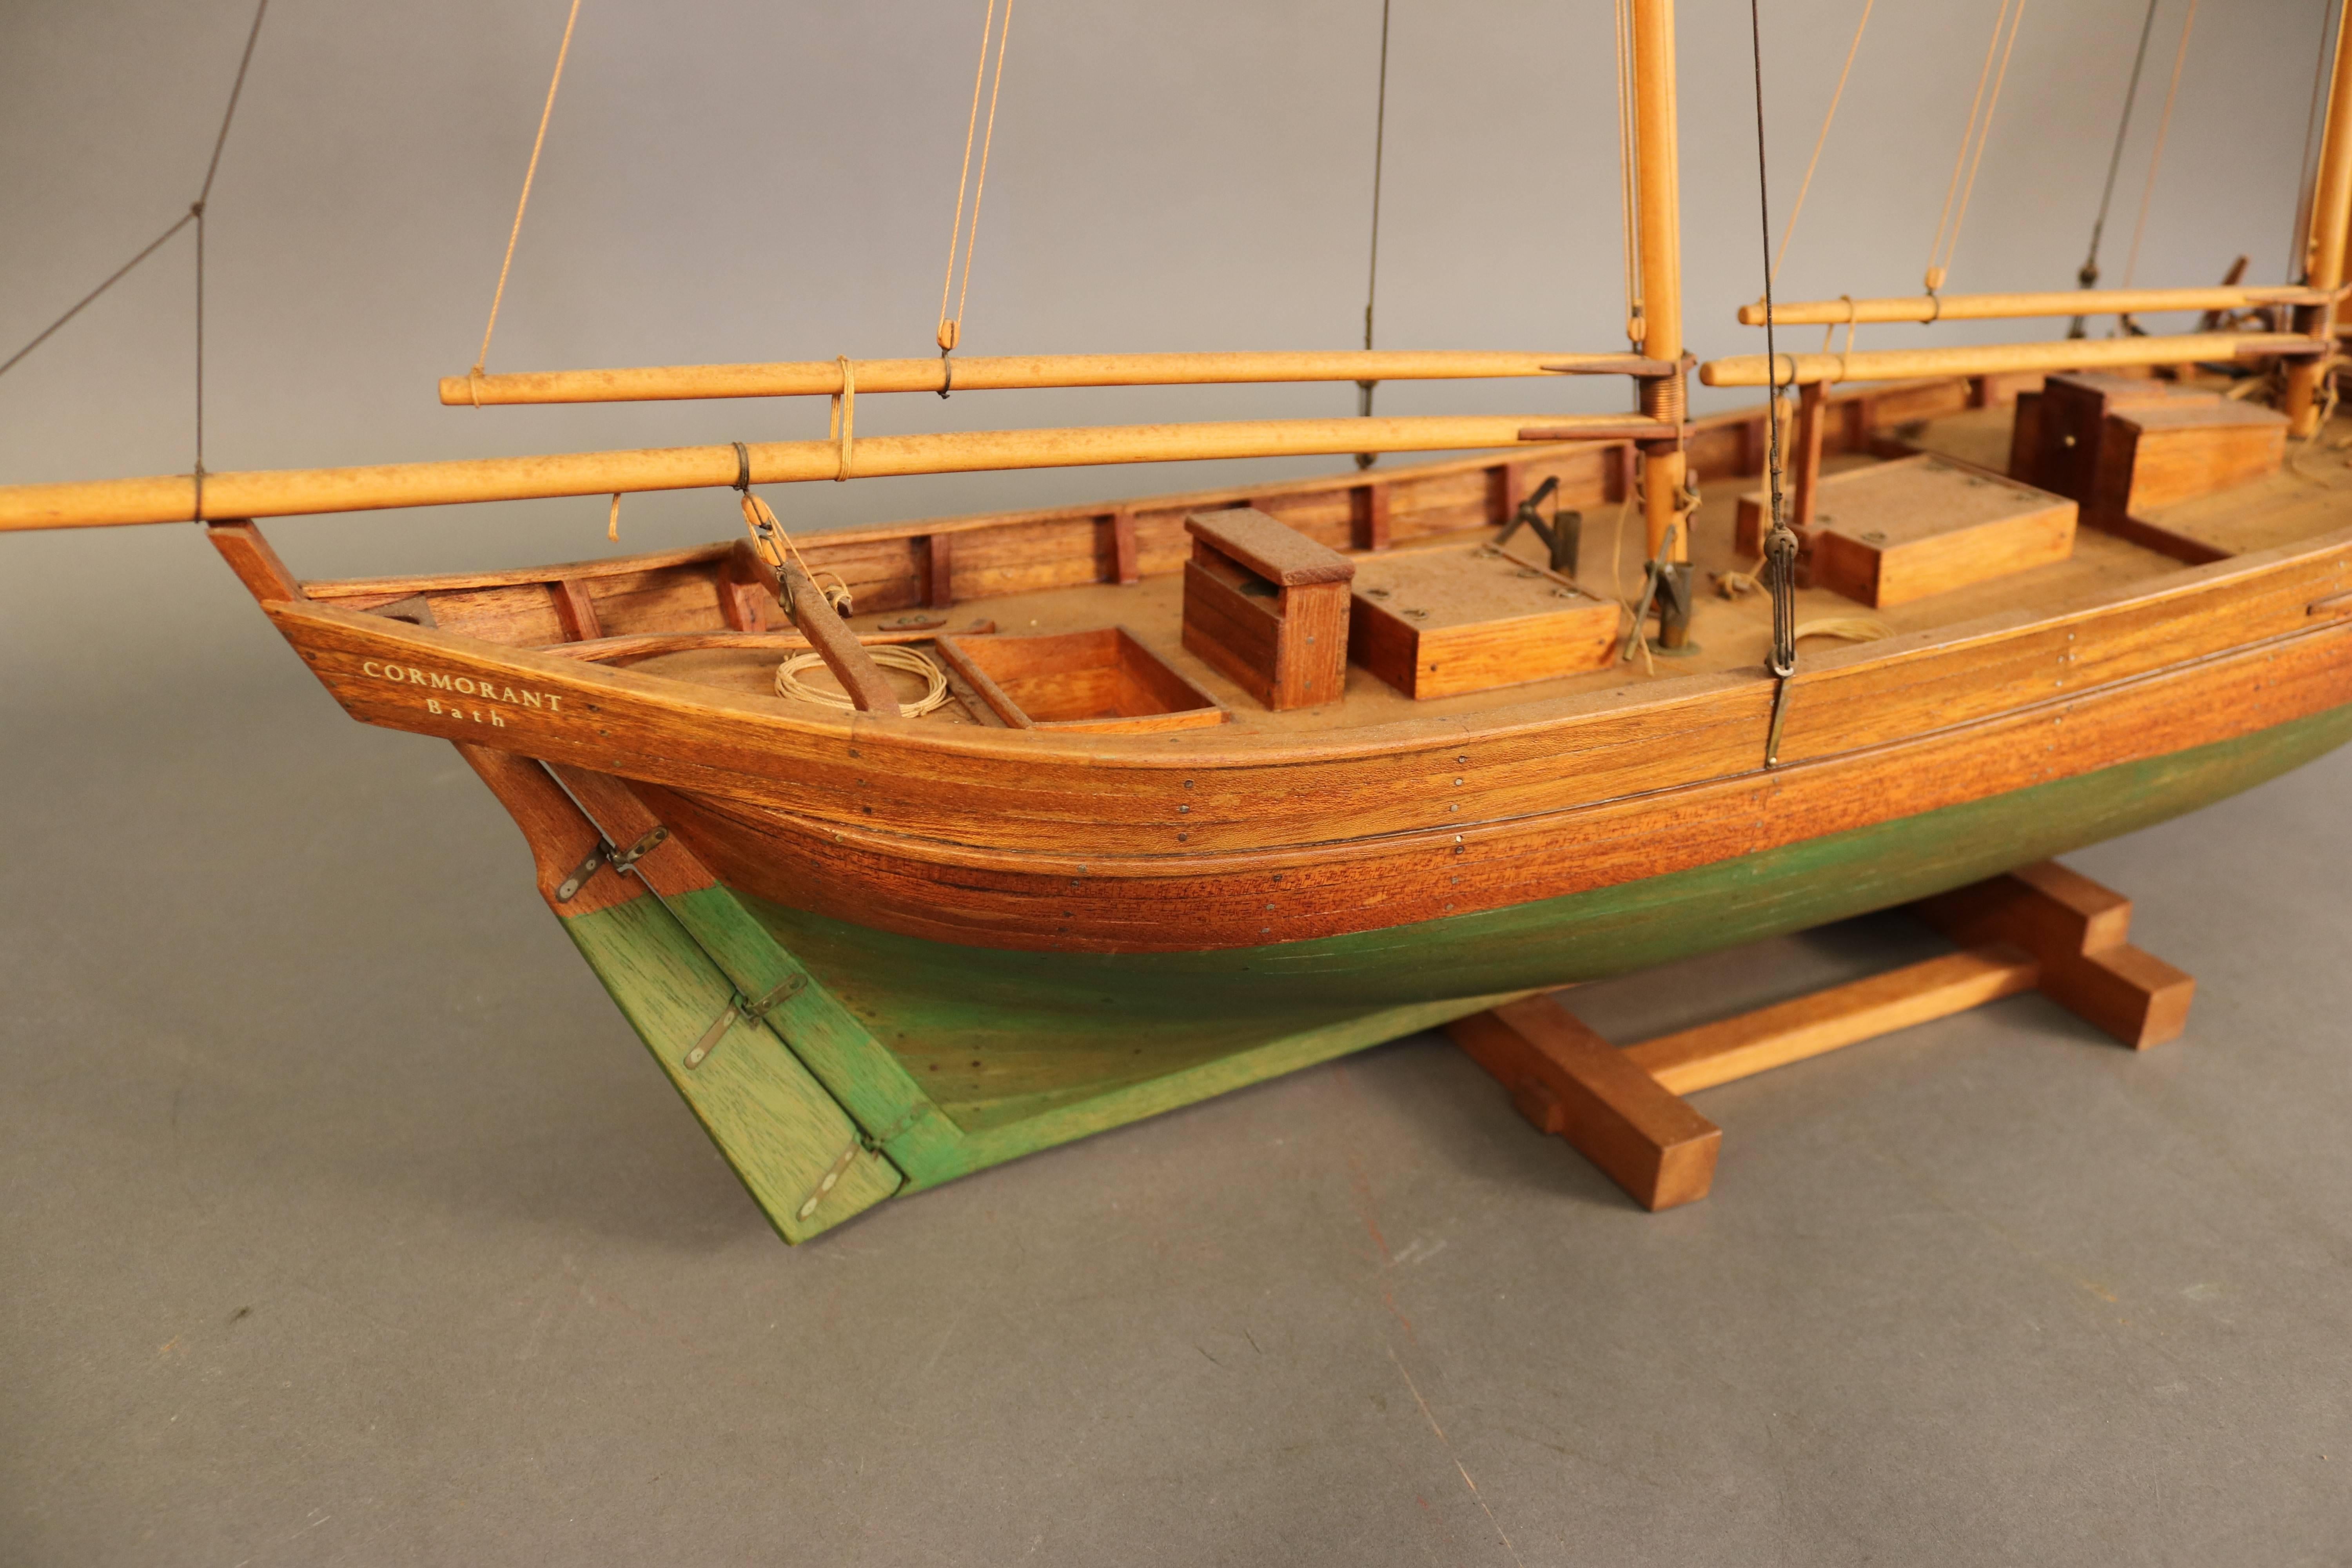 Fine model of the Eastport Pinky "Cormorant" by Cape Cod model master Robert Innis (1893-1983). Innis was a talented builder who rigged ship models with the use of a prosthesis. His ship models are in the Hart Nautical Museum at the